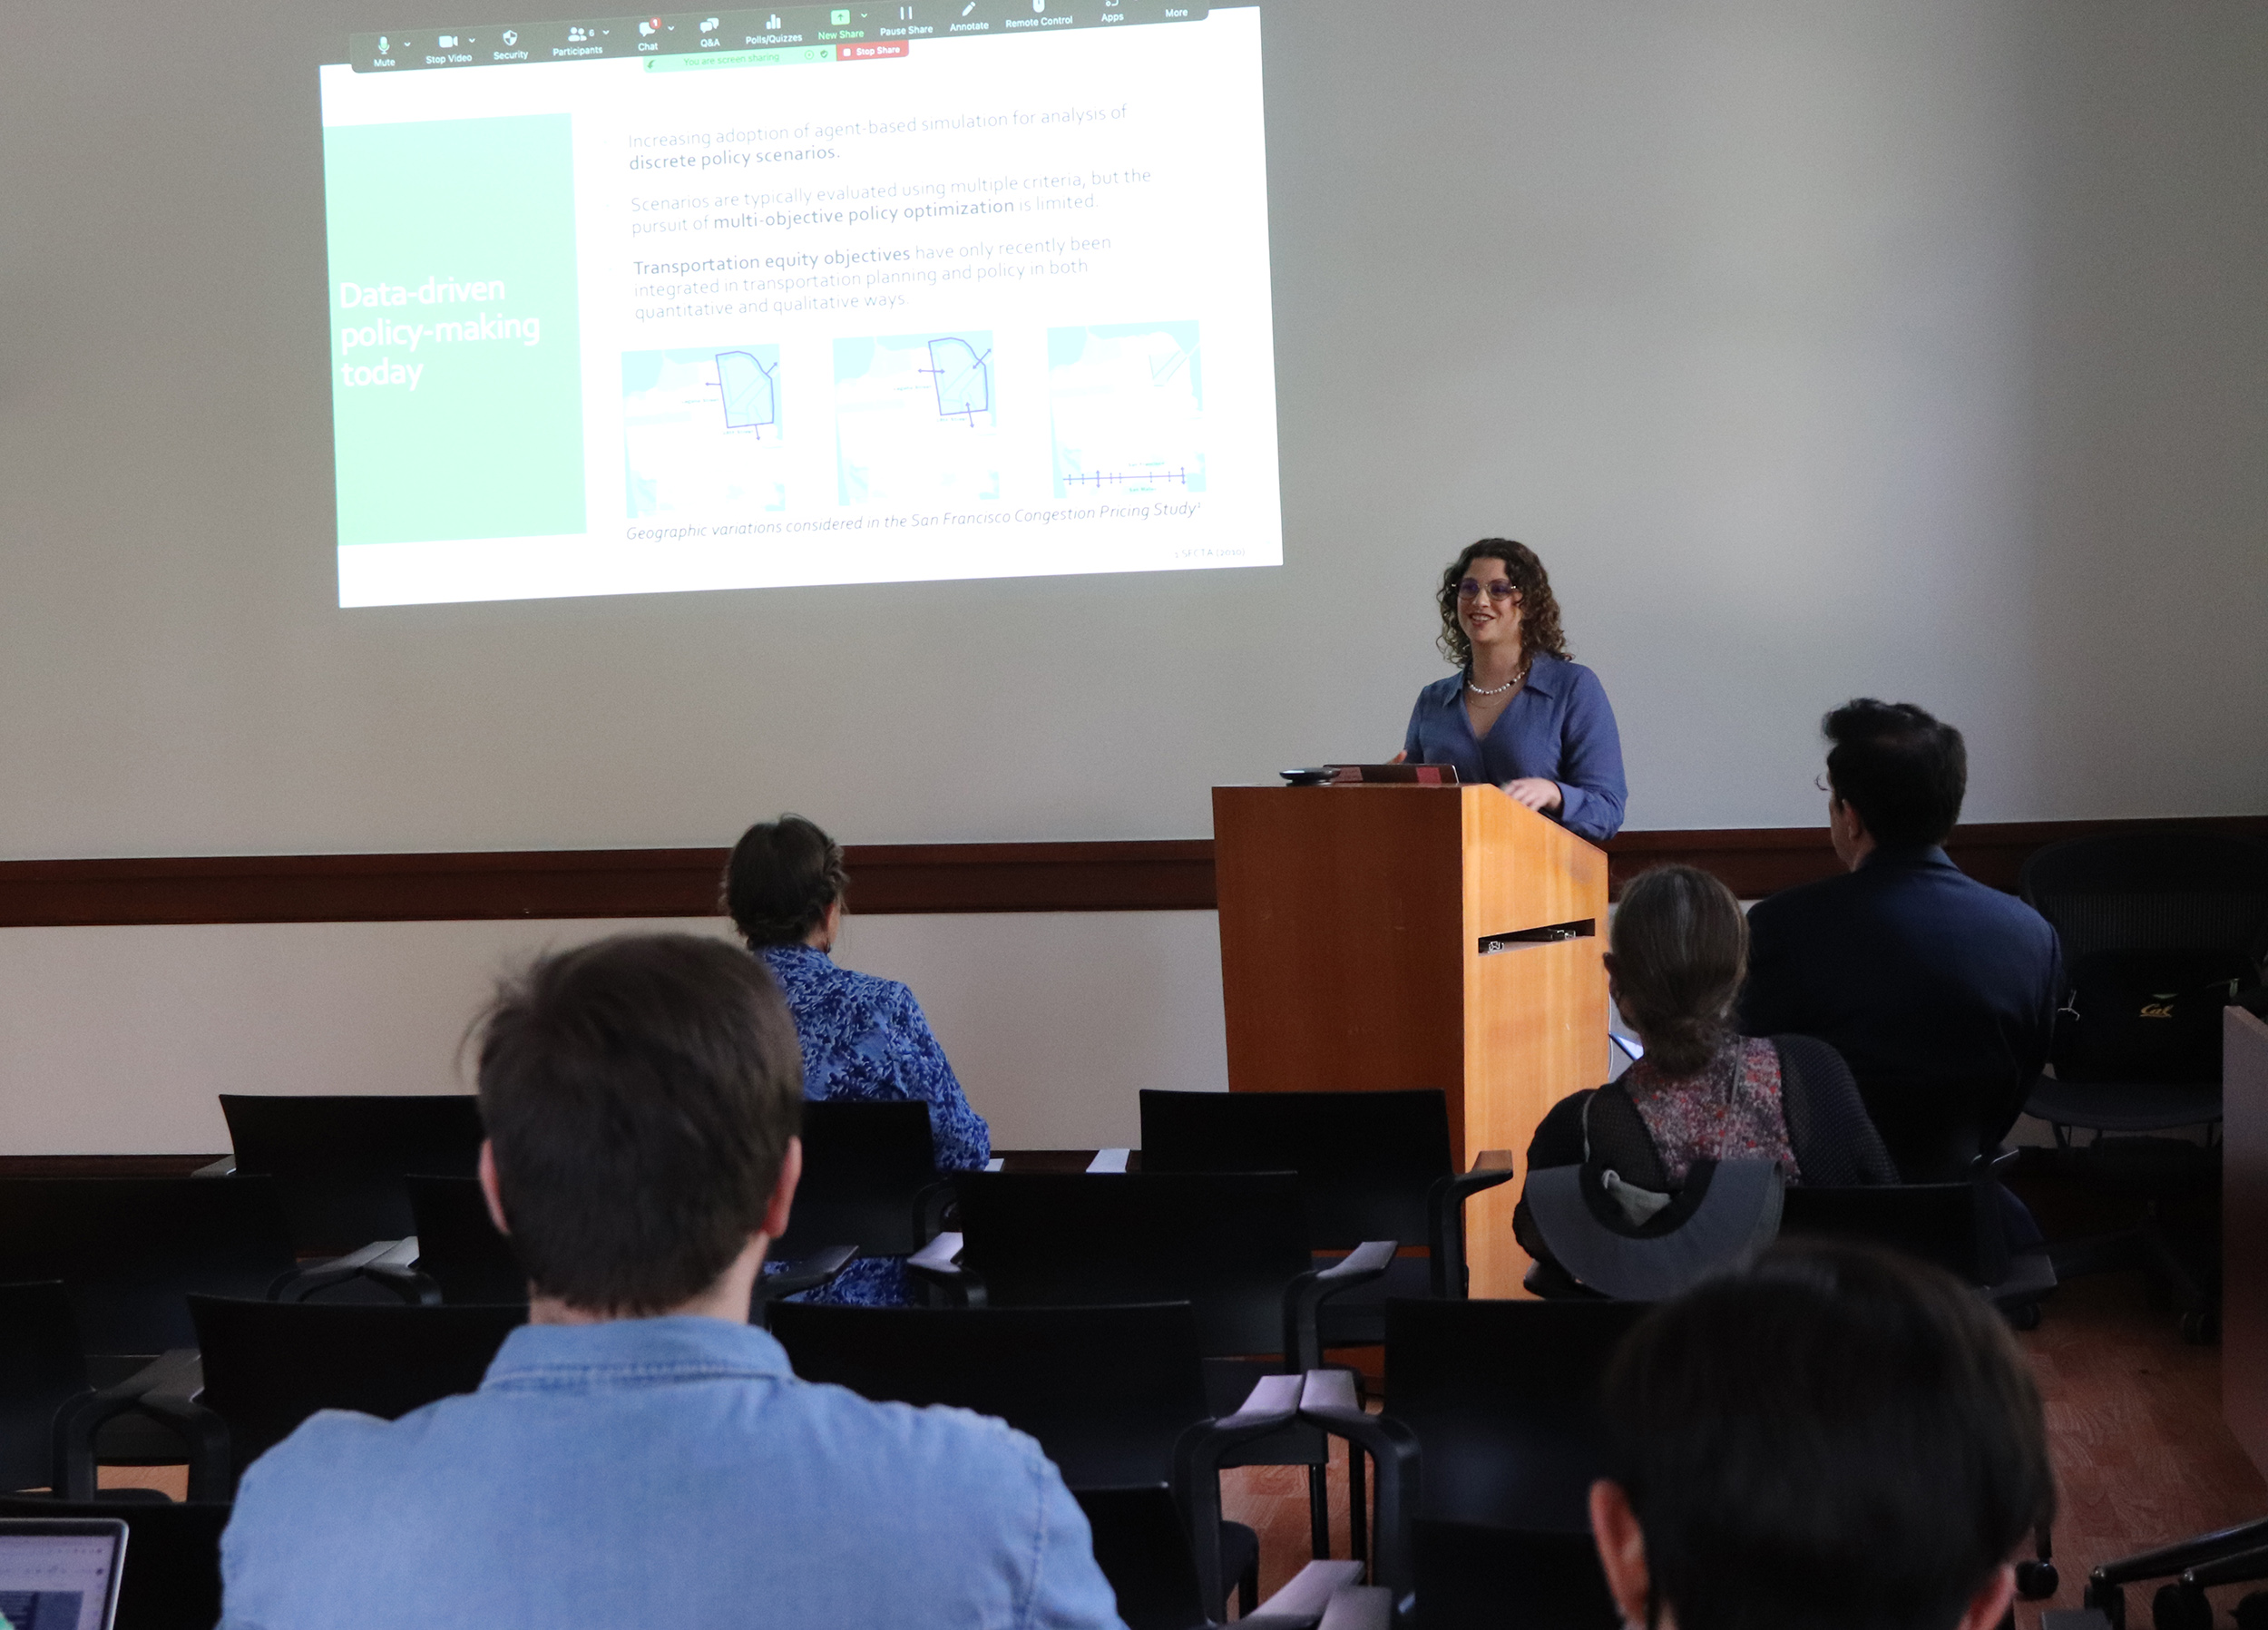 Jessica Lazarus (PhD Graduate Civil and Environmental Engineering) Multi-Objective Optimization of Pricing Strategies for Sustainable Transportation